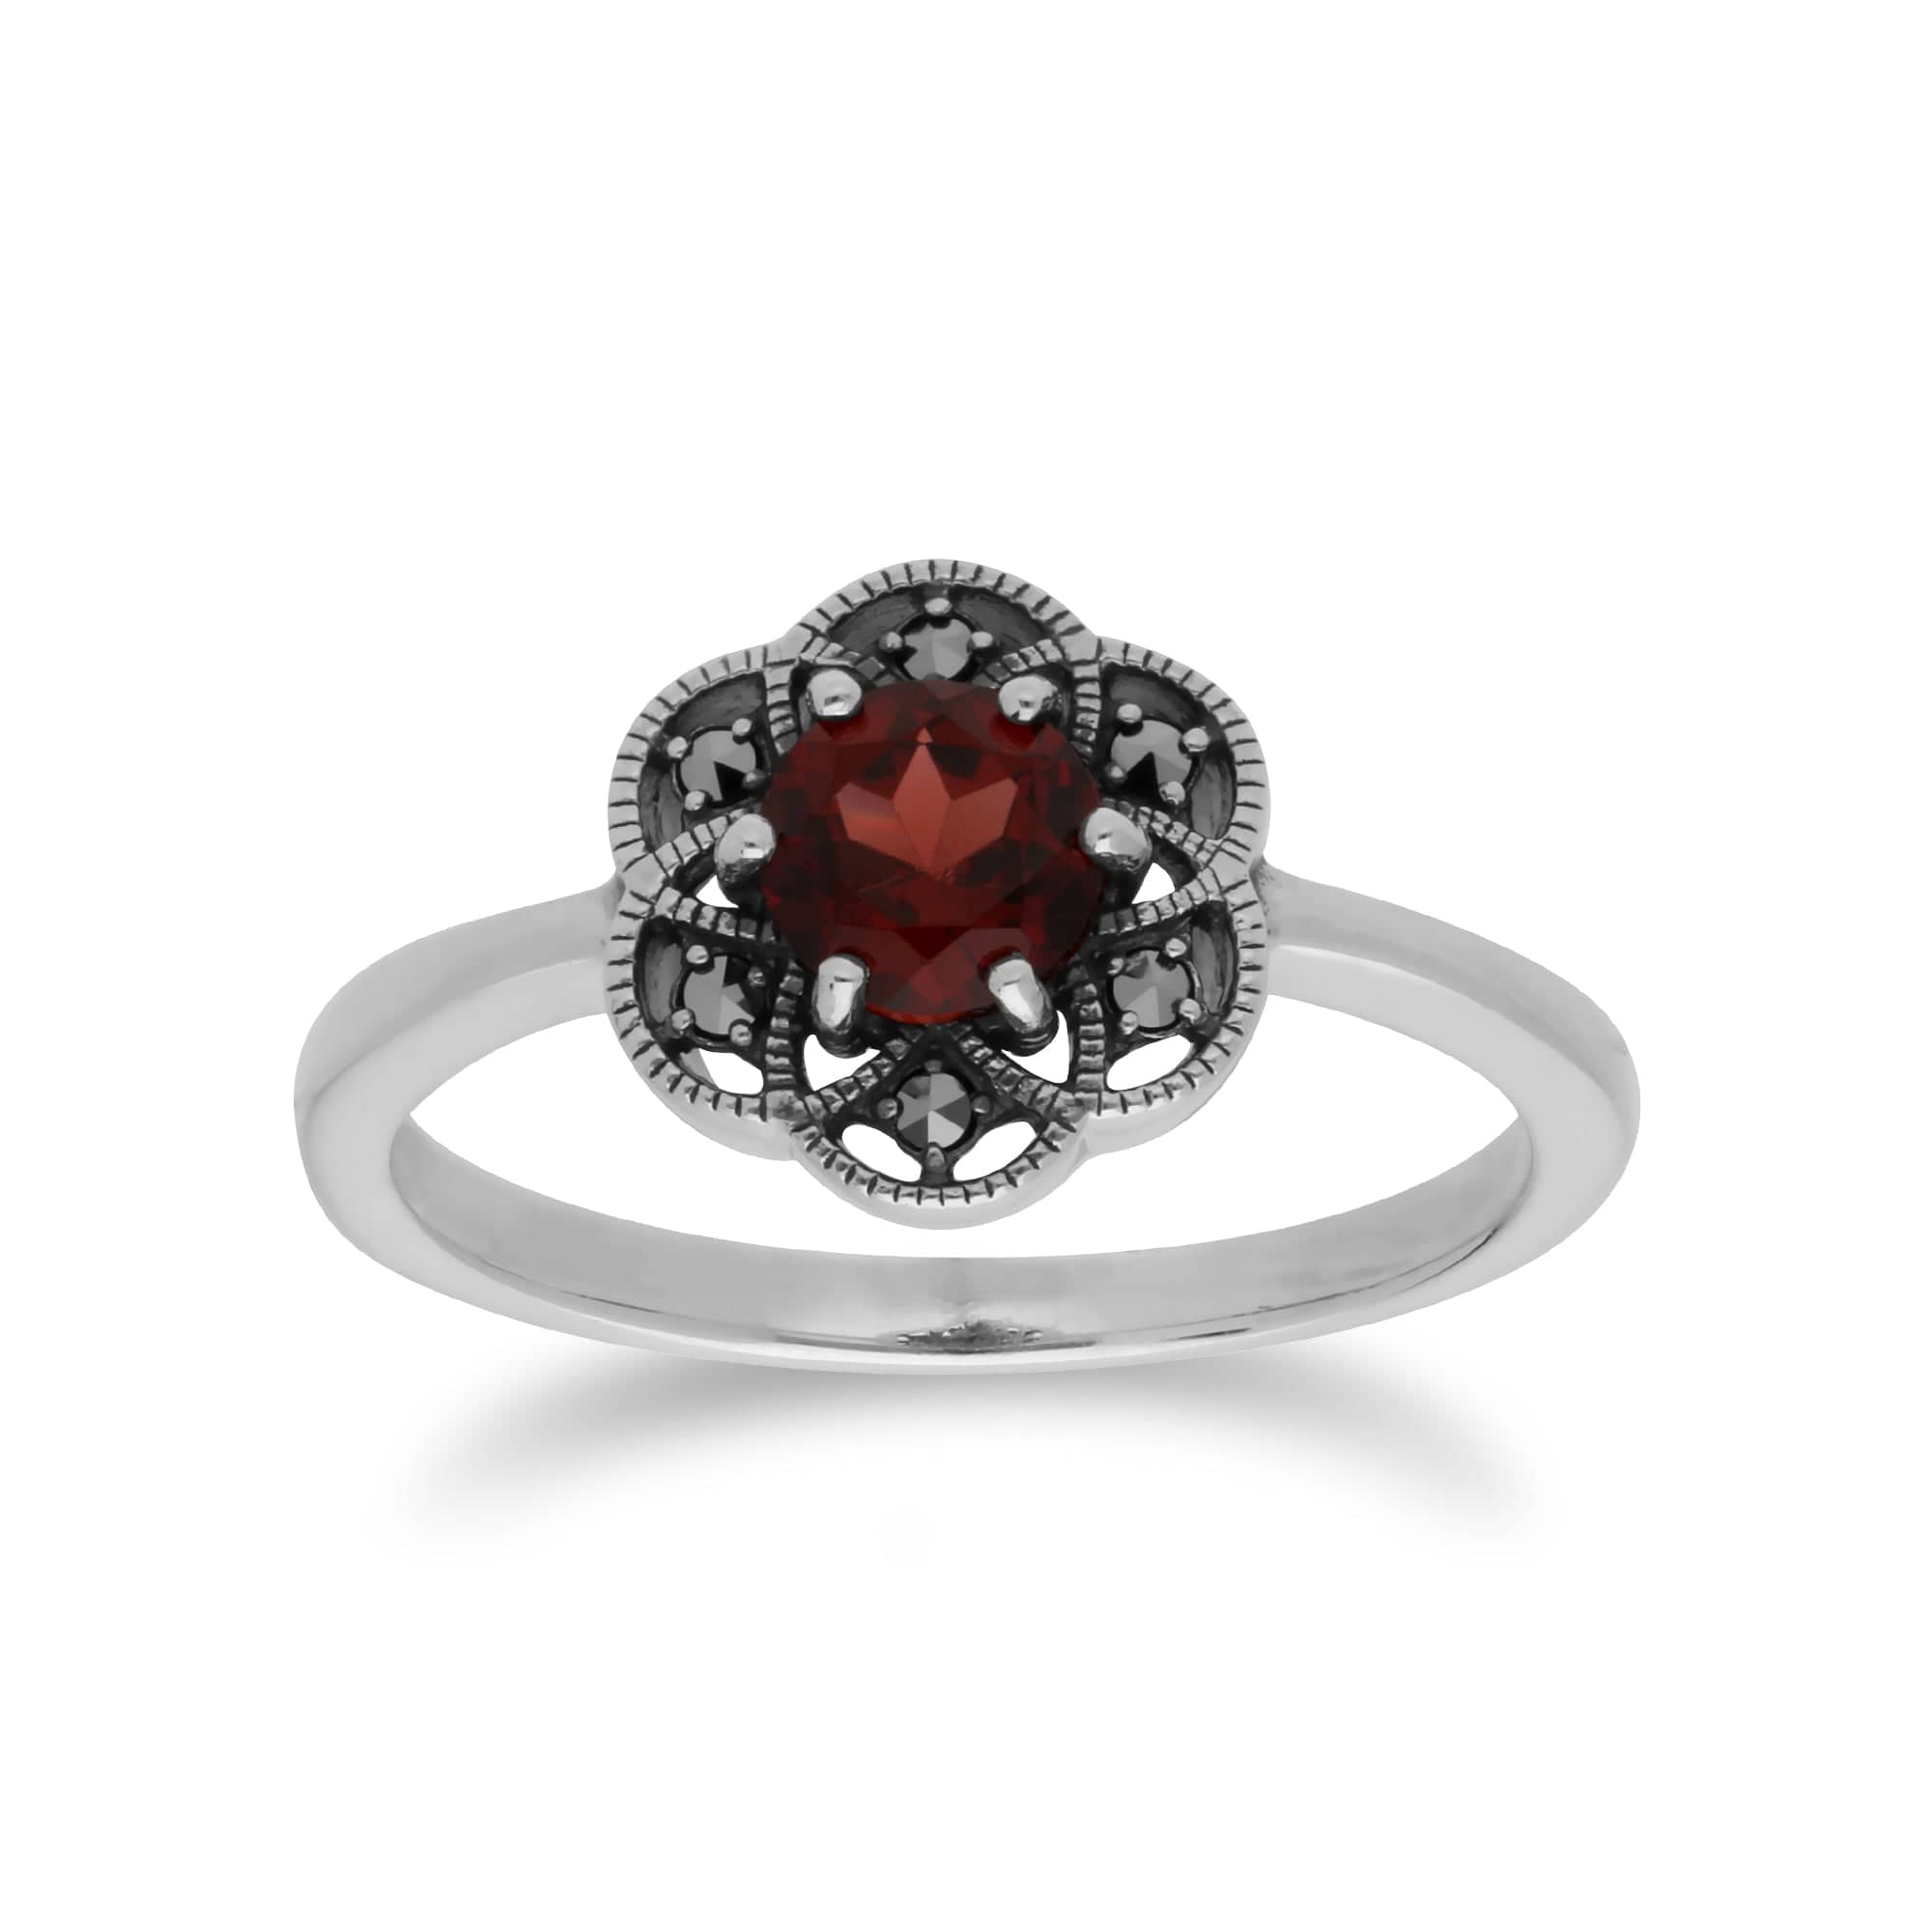 214R599403925 Floral Round Garnet & Marcasite Daisy Ring in 925 Sterling Silver 1